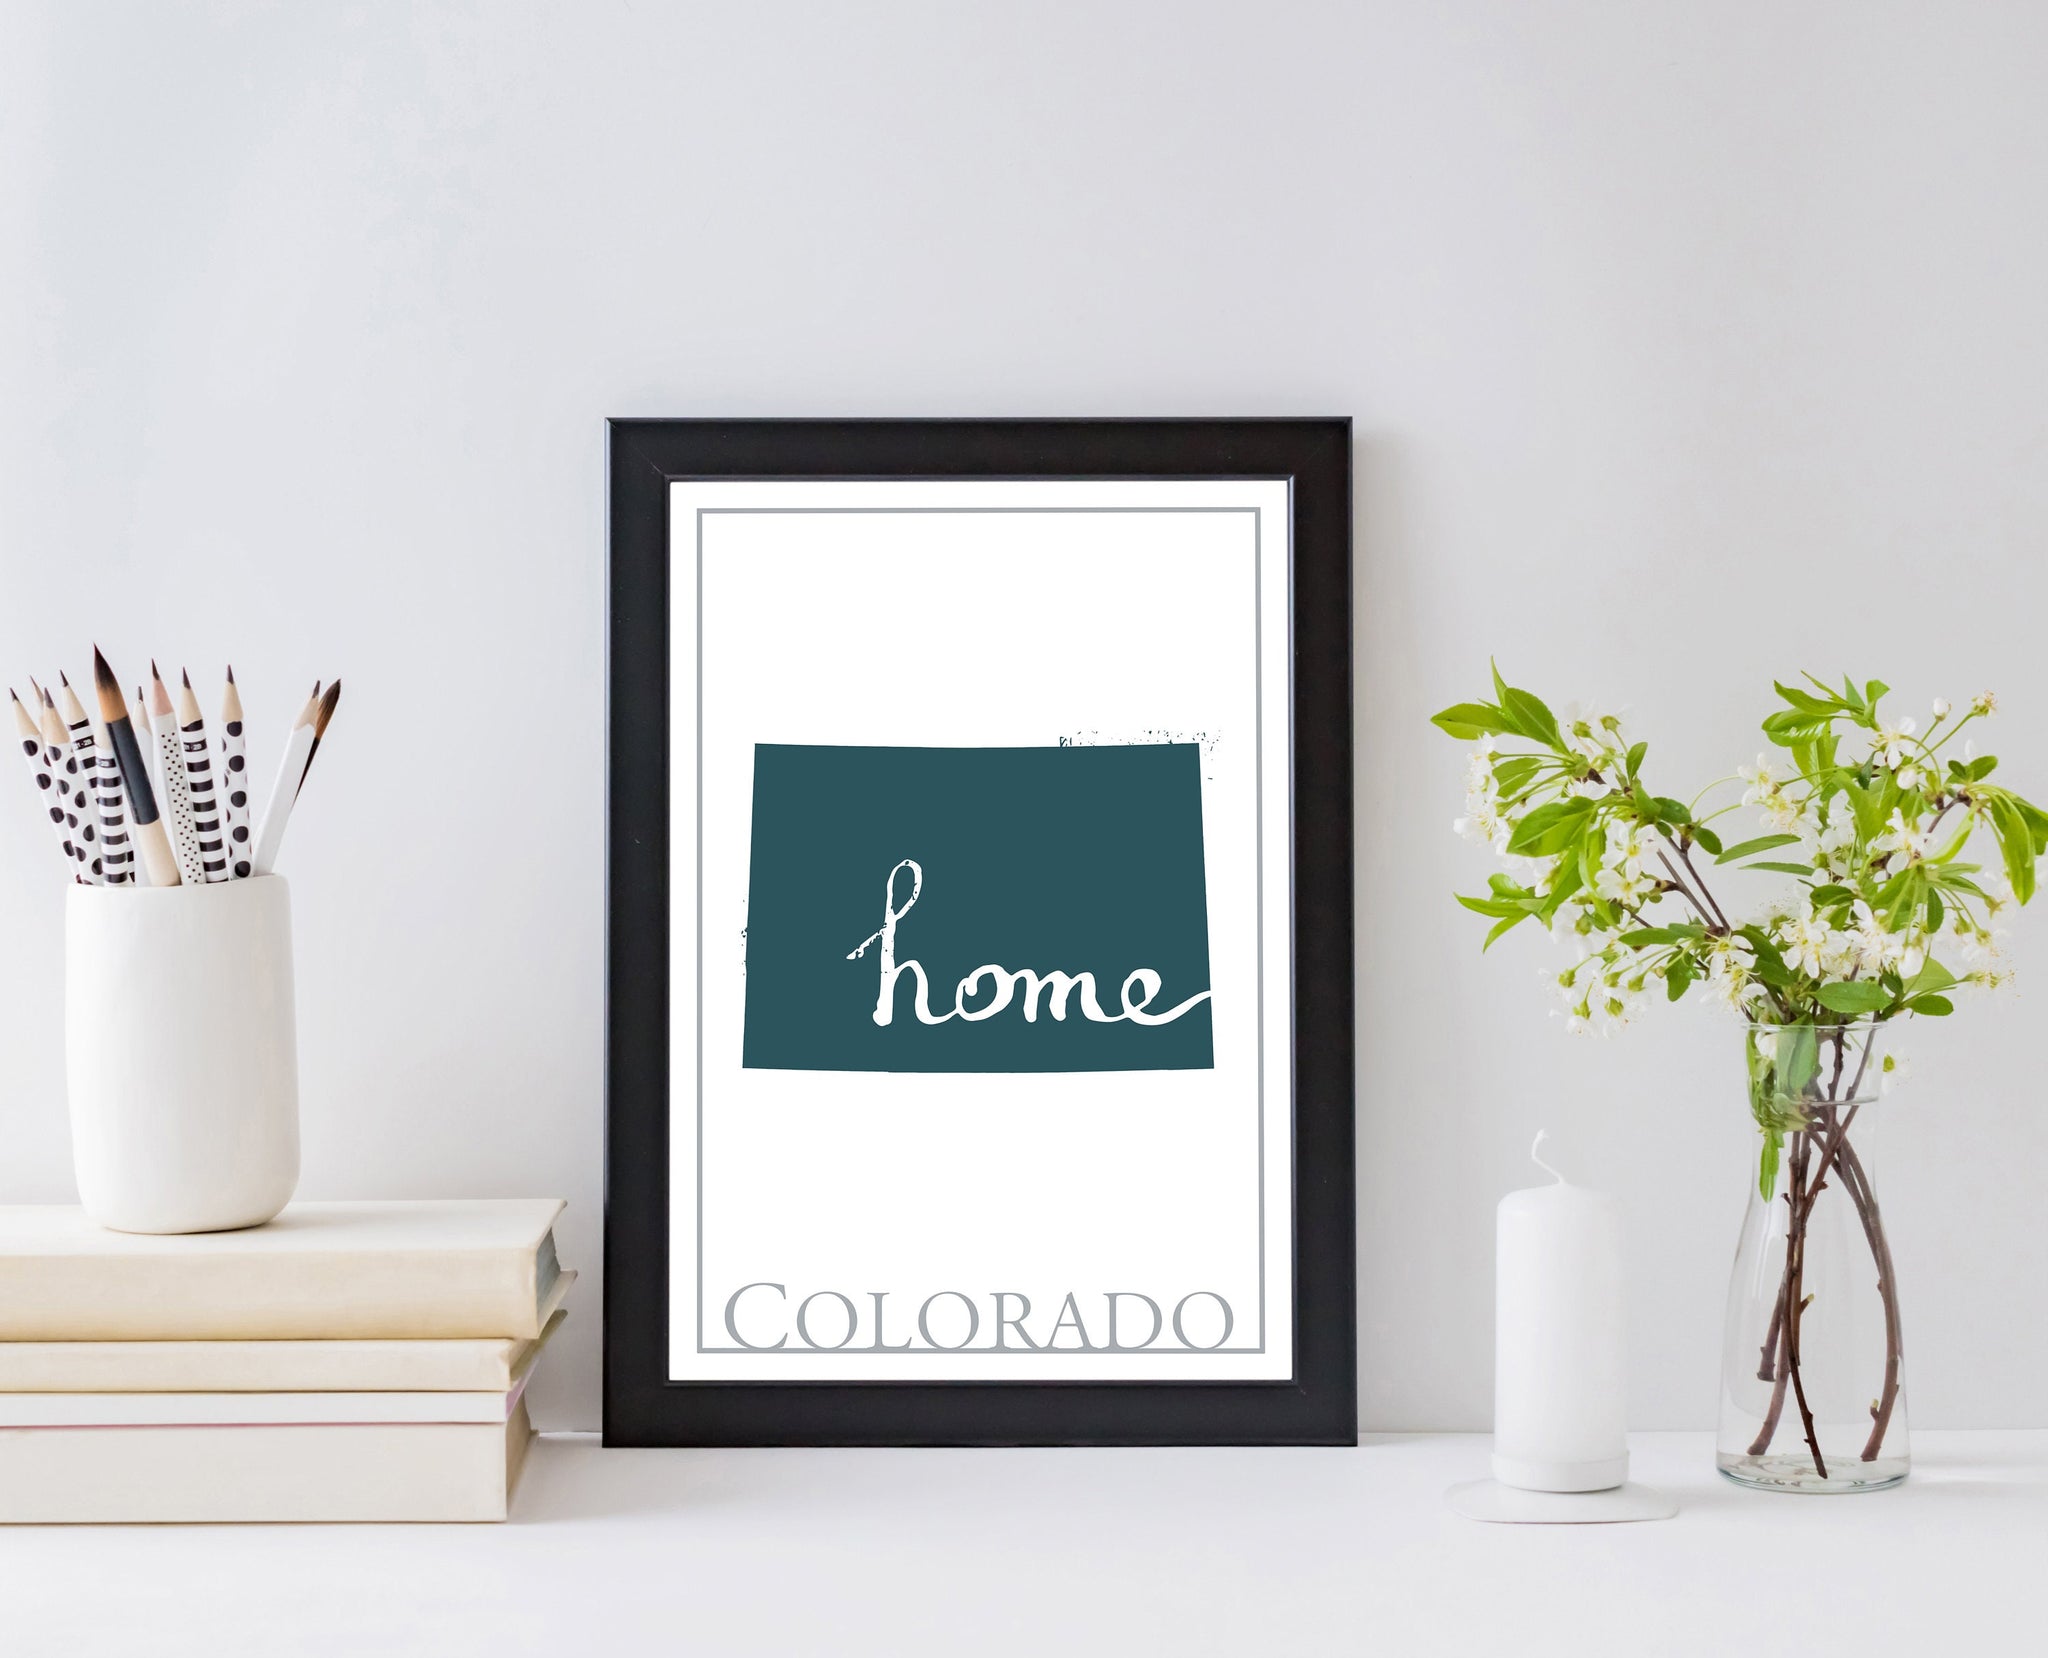 Colorado Map Wall Art, Colorado Modern Map Poster, Home Wall Decor, City Map, States map posters, Home wall decor, Office wall decor, Gifts